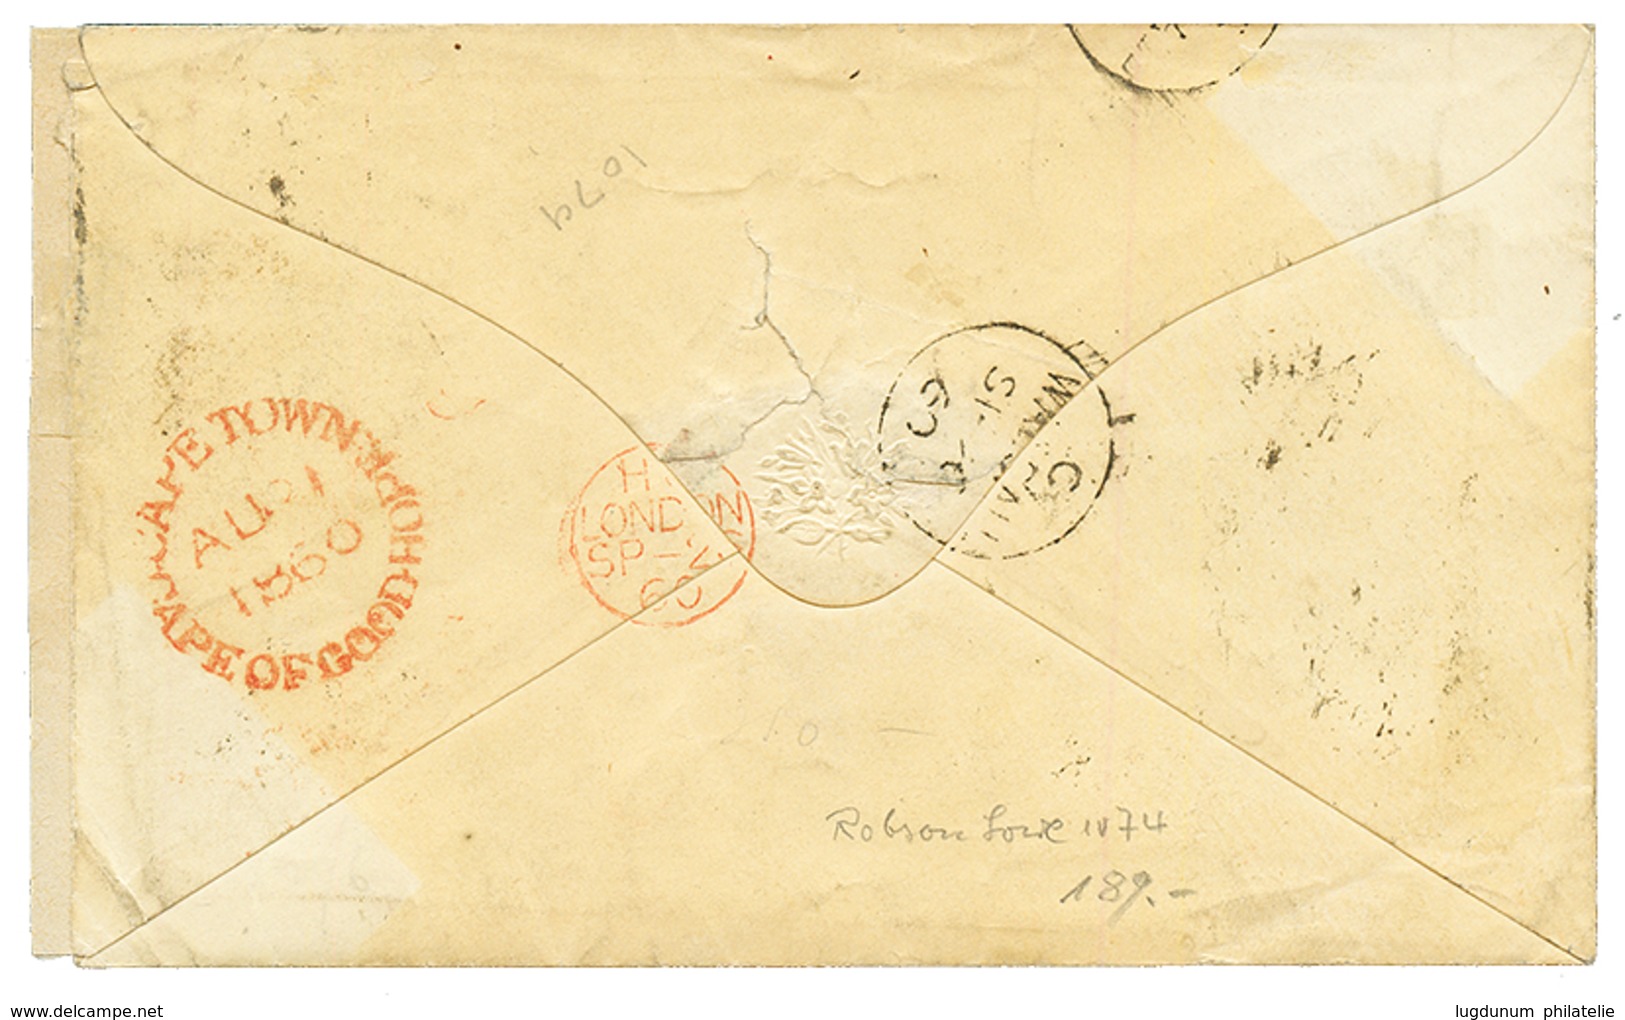 CAPE OF GOOD HOPE : 1860 6d Lilac 3 Close To Large Margins + PAID DEVONPORT CAPE-PACKET On Envelope To ENGLAND. Some Fau - Cape Of Good Hope (1853-1904)